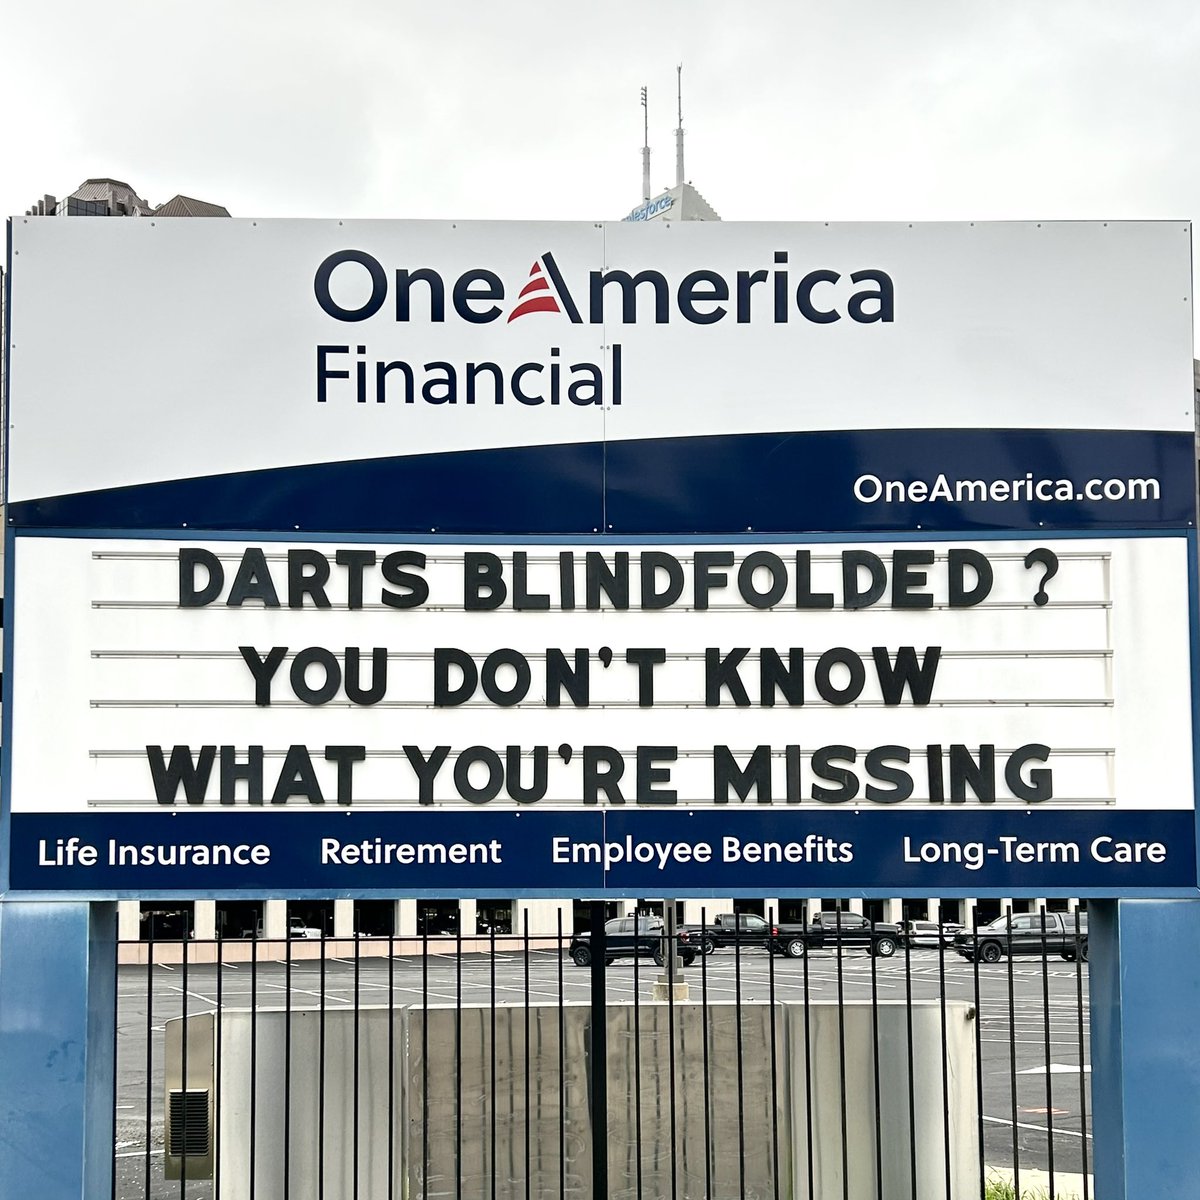 🏹 This week's #OneAmericaSign really hits the bullseye. 🎯 
#LoveIndy #Indy #Indianapolis #OneAmericaFinancial